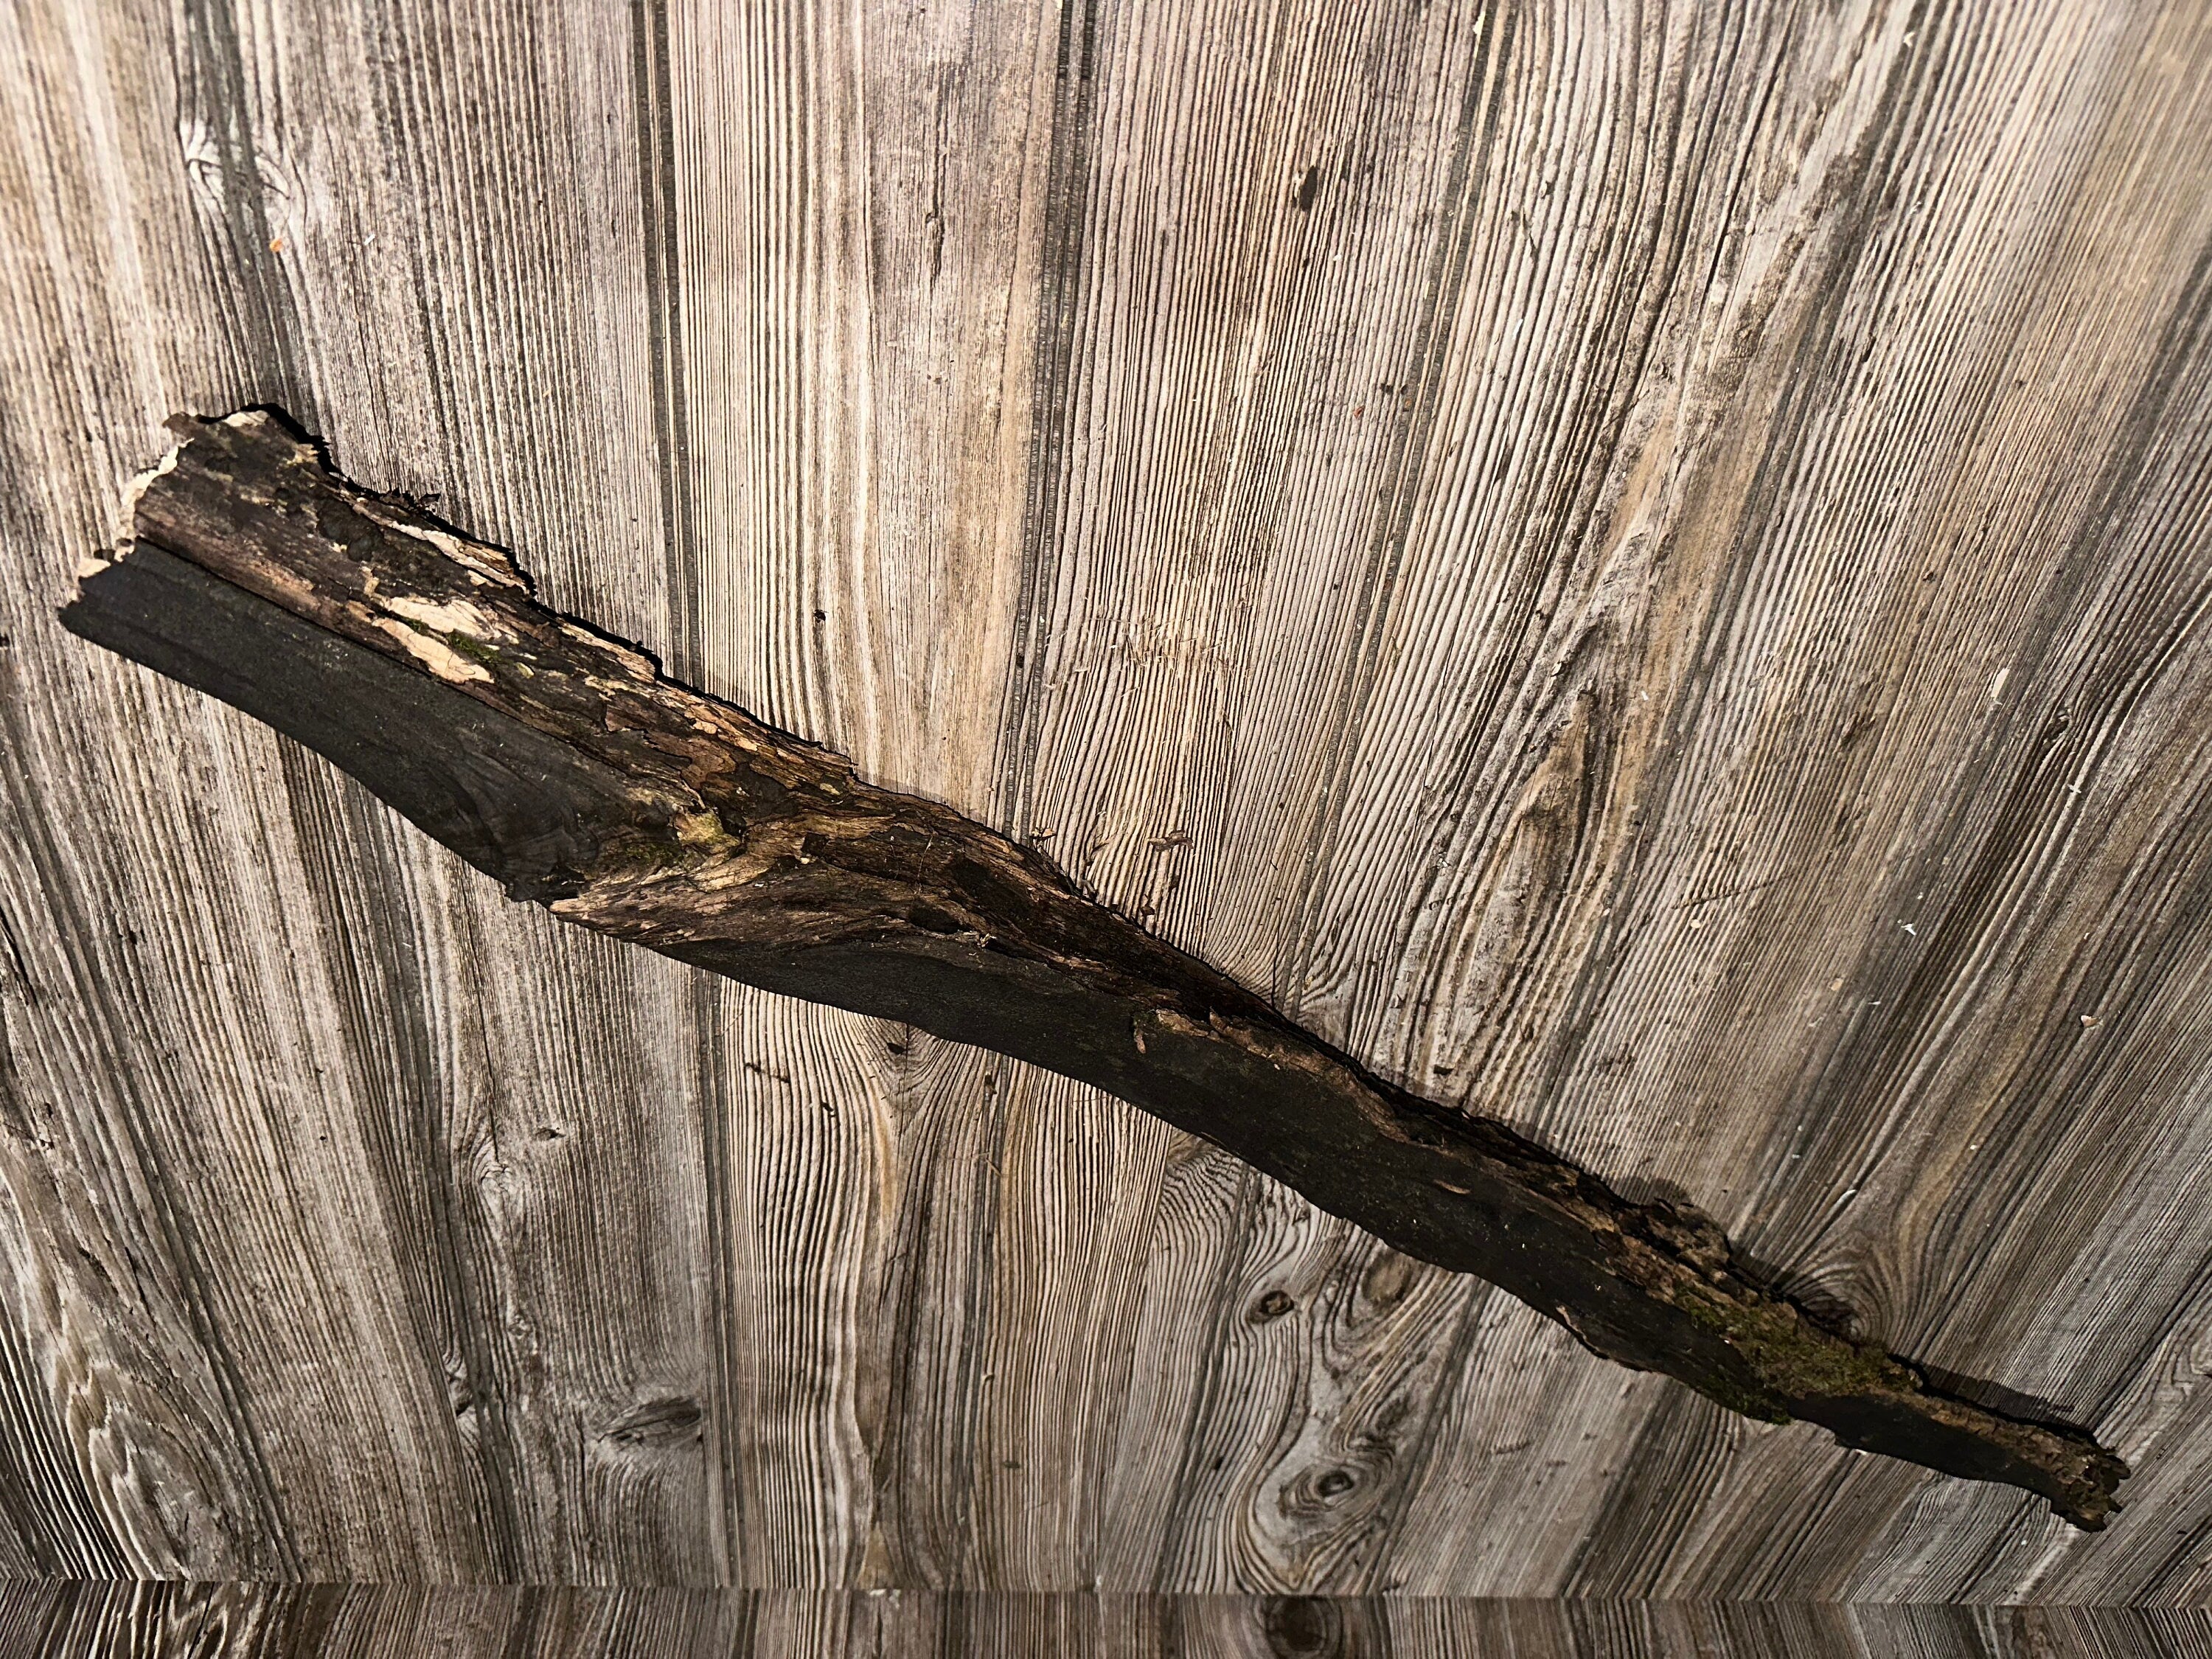 Tree Limb, Branch End, Driftwood, Approximately 33.5 Inches Long by 3 Inches Wide and 3 Inches Tall